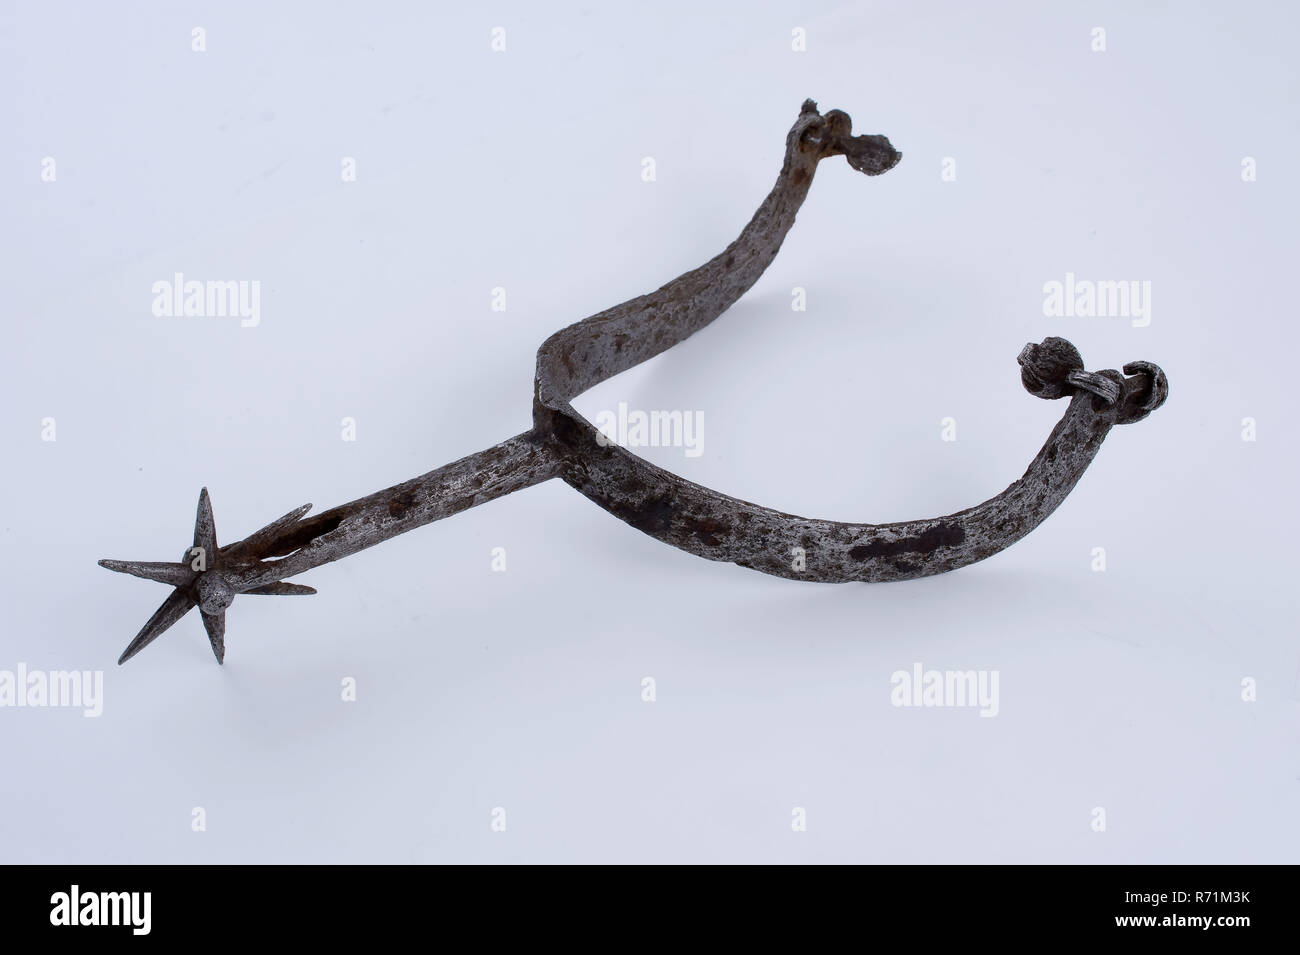 Iron horseshoe with pointed star at the heel piece, horseshoe soil found iron metal, forged Ruiterspoor with multi-pointed star as stimulus archeology Oostvoorne horse riding horse rider spur on Oostoost found on the site of the former castle. Stock Photo